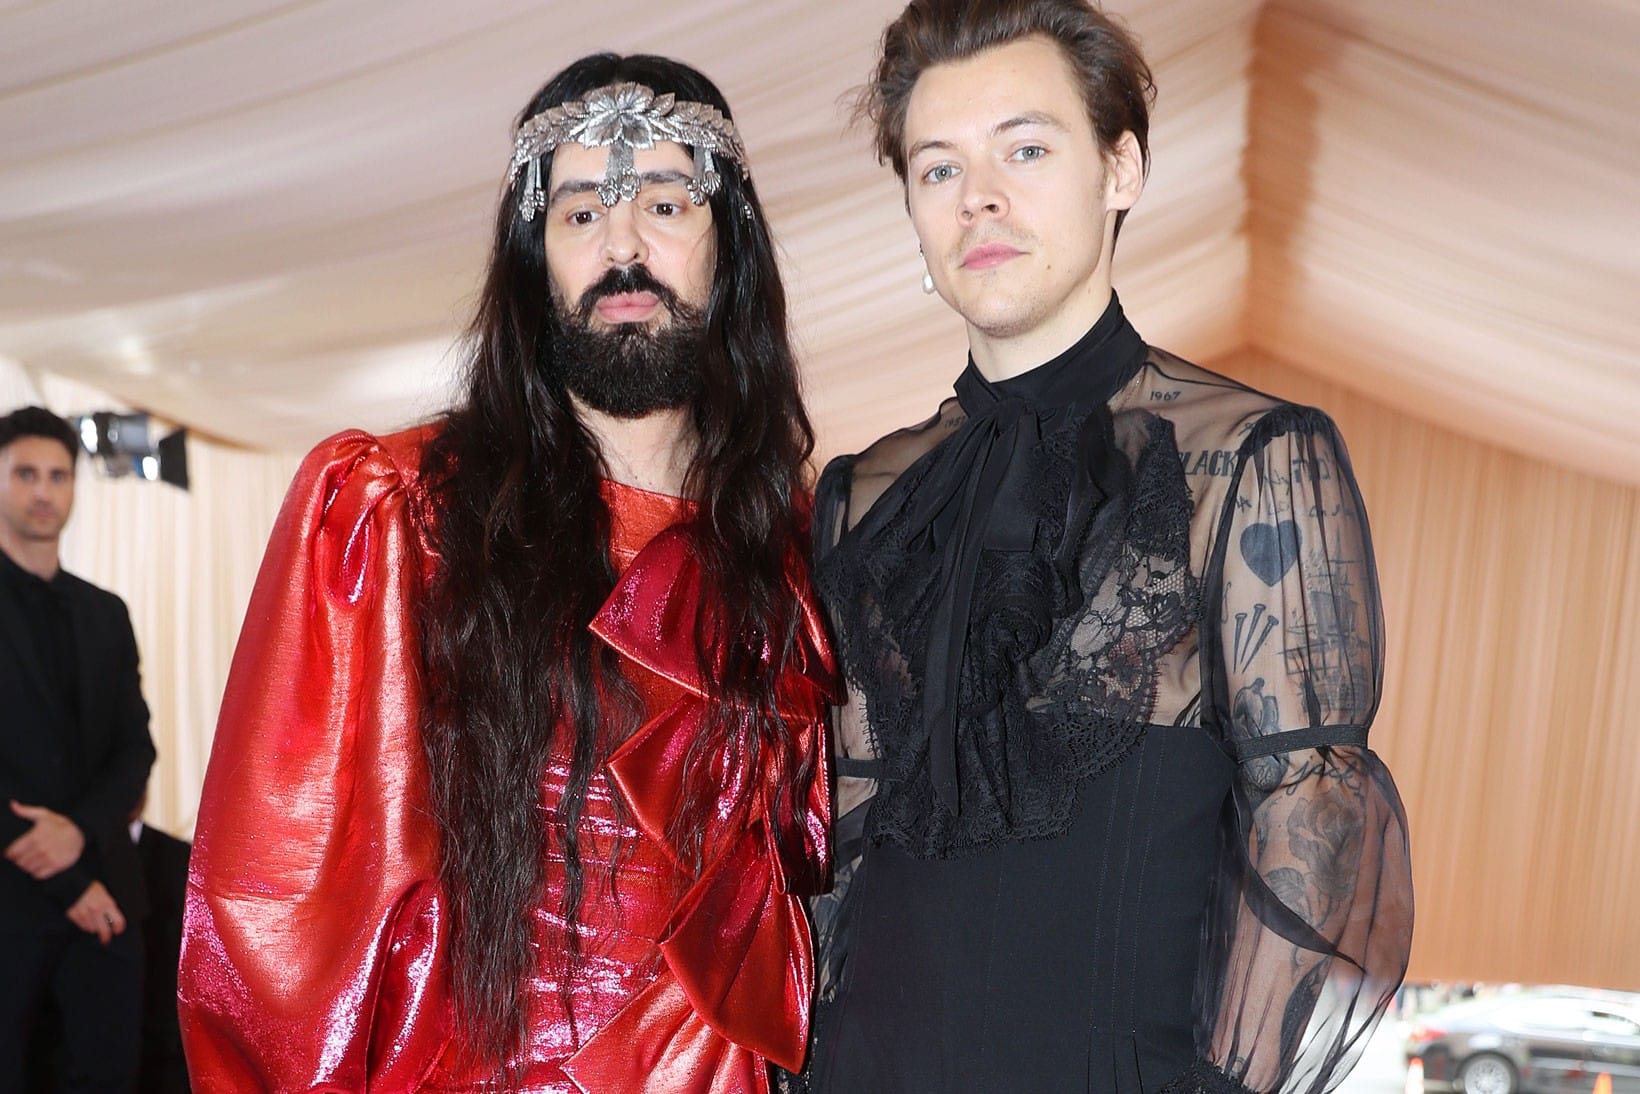 alessandro michele contact